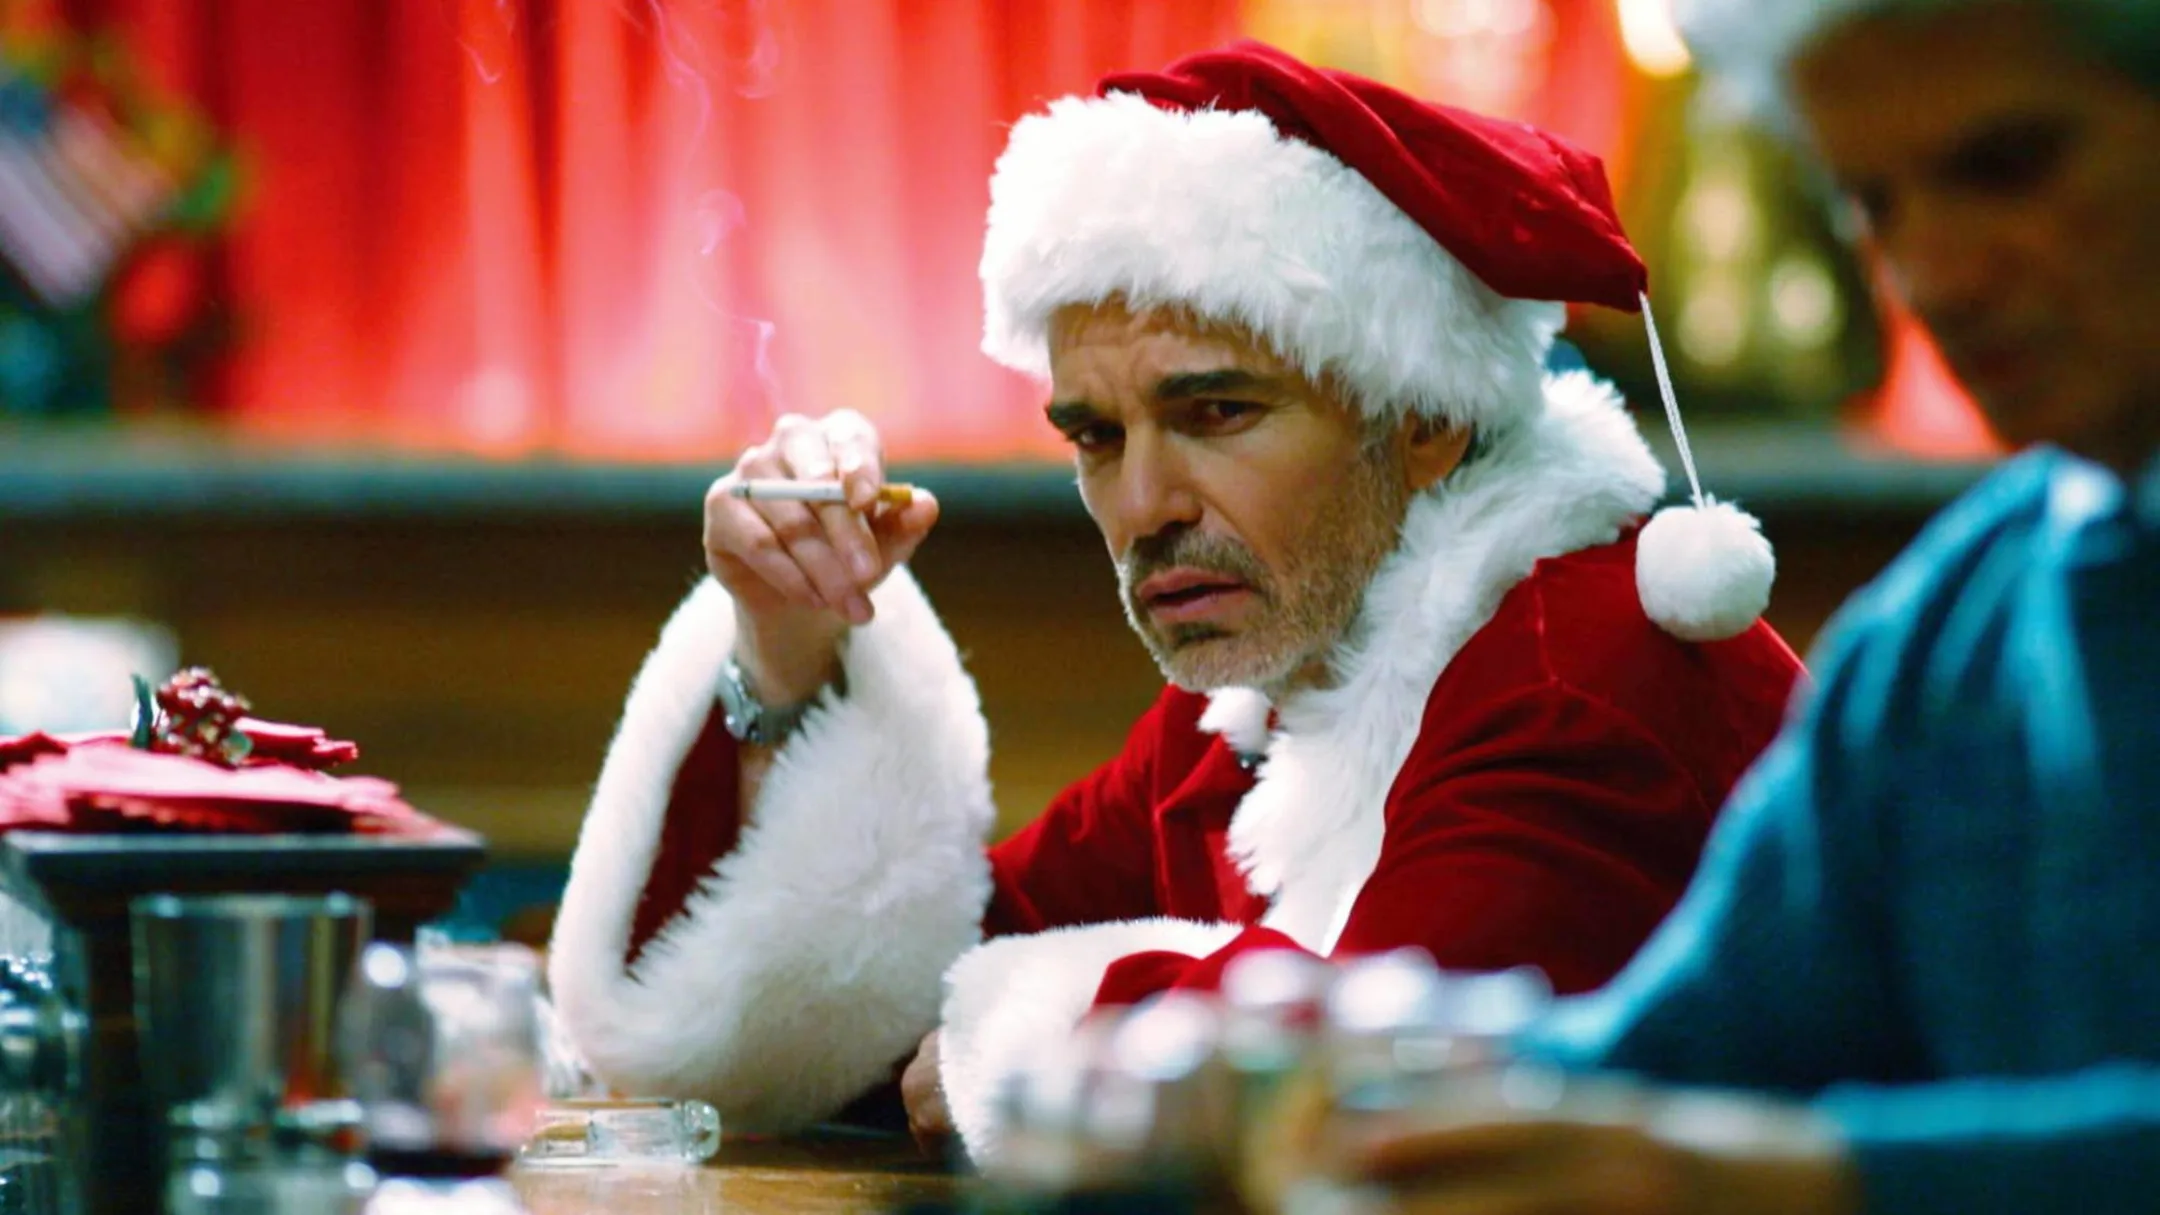 Bad Santa, Scrooged, The Office, Lord of the Rings and more coming for Christmas